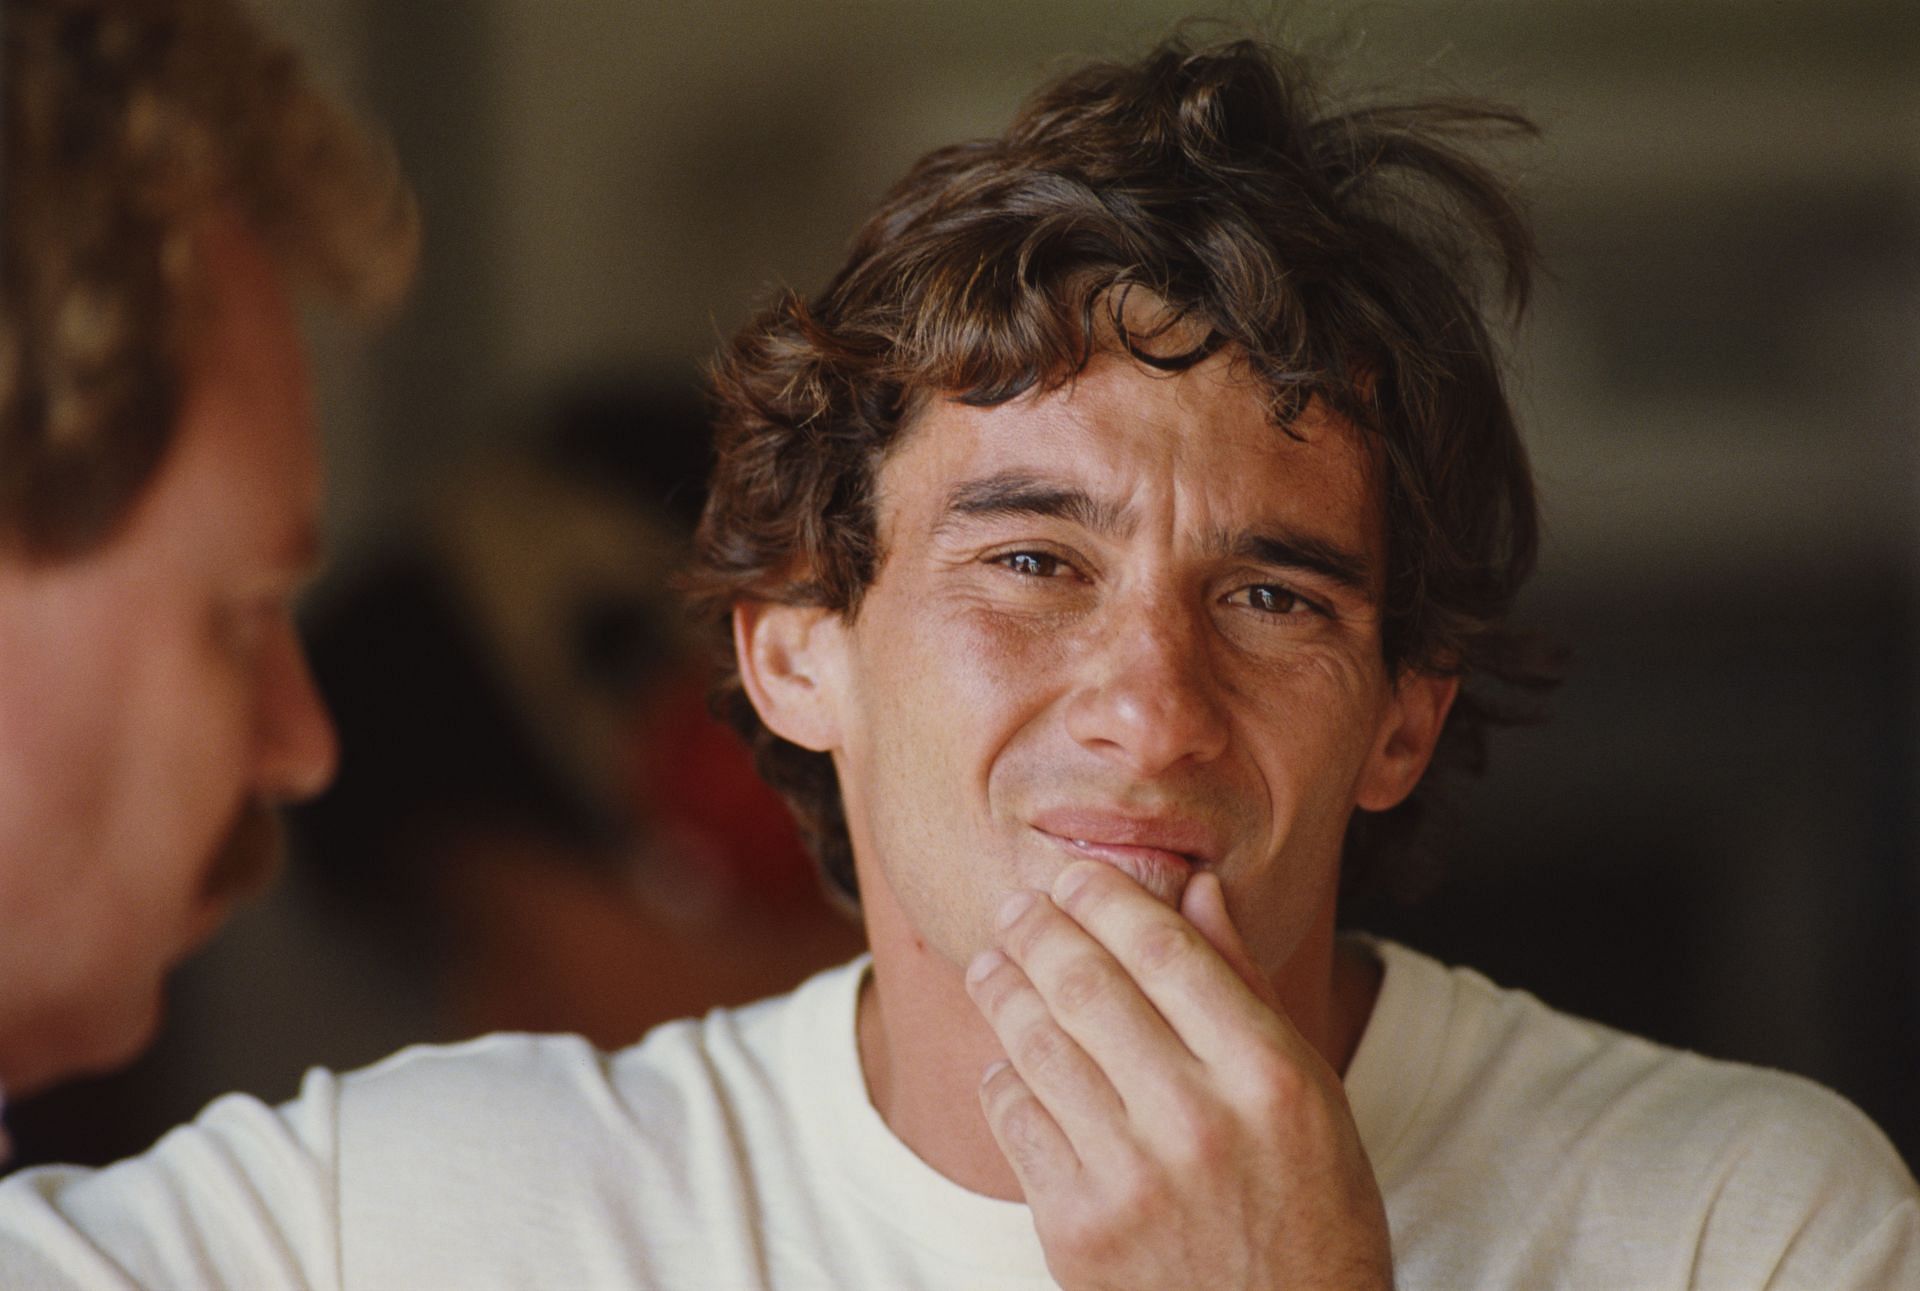 Ayrton Senna was a force of nature that took over Formula 1 in the late 1980s